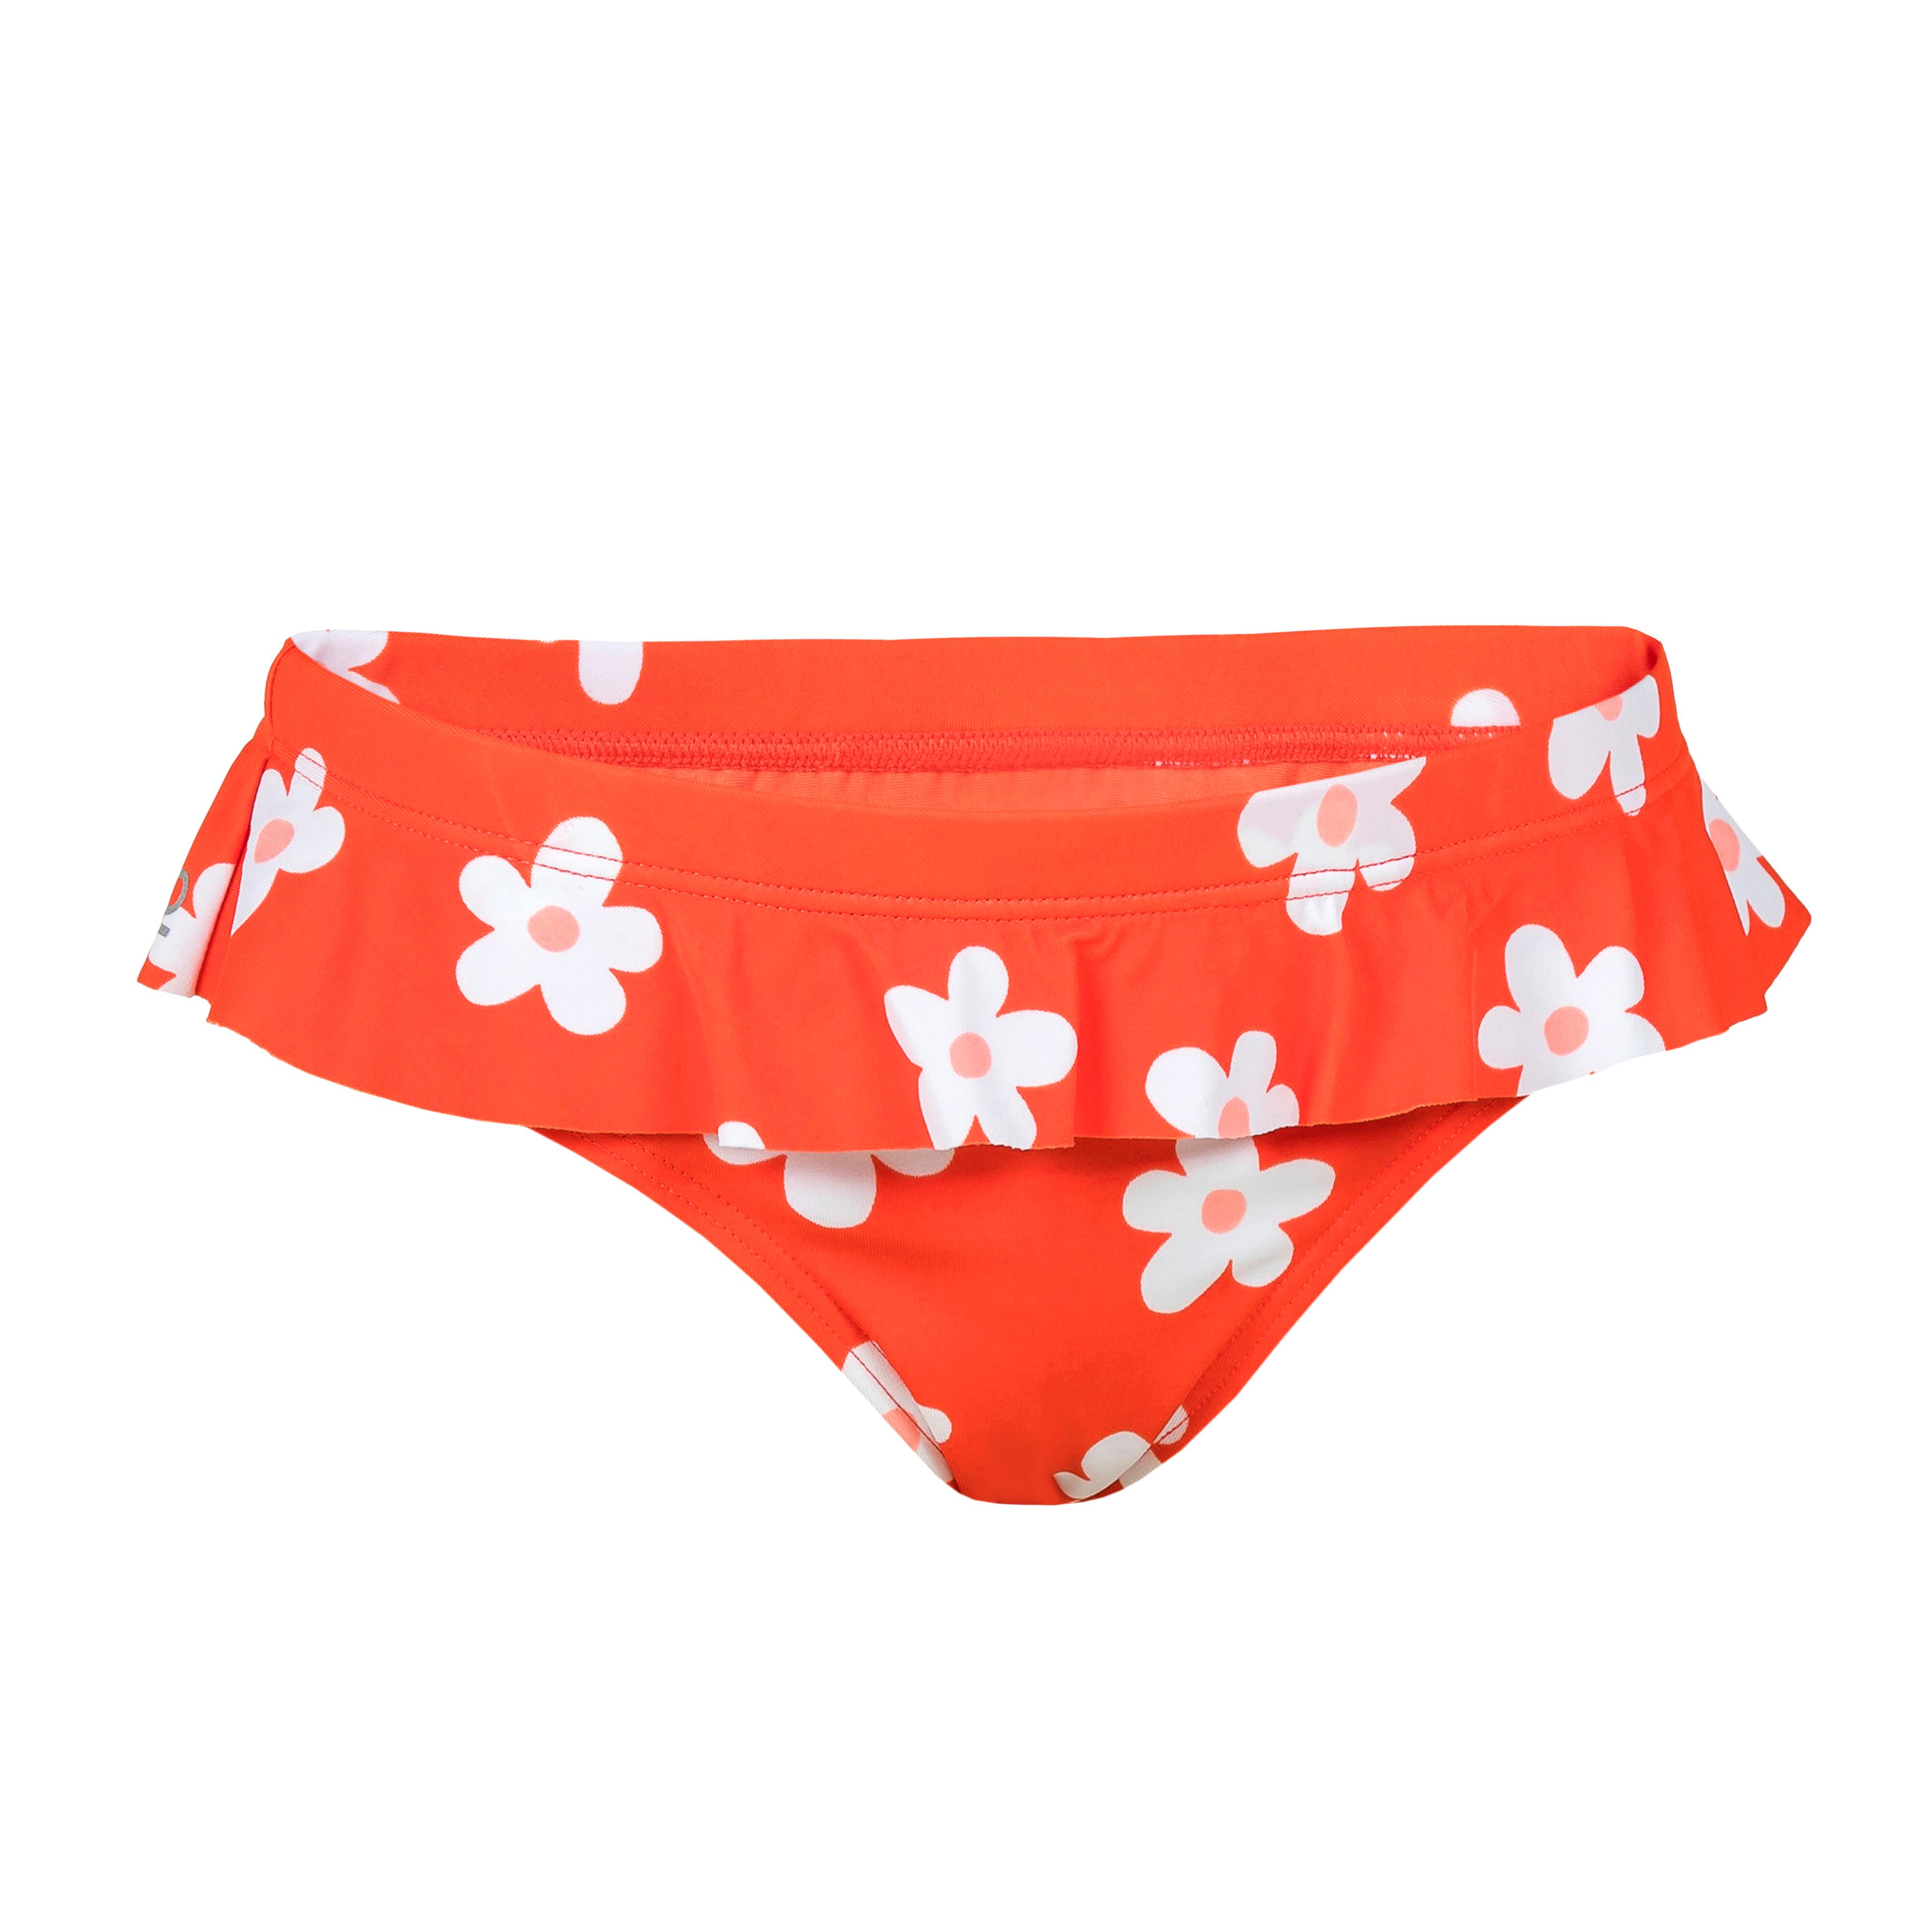 Girls swimming bottoms in Red Blossom